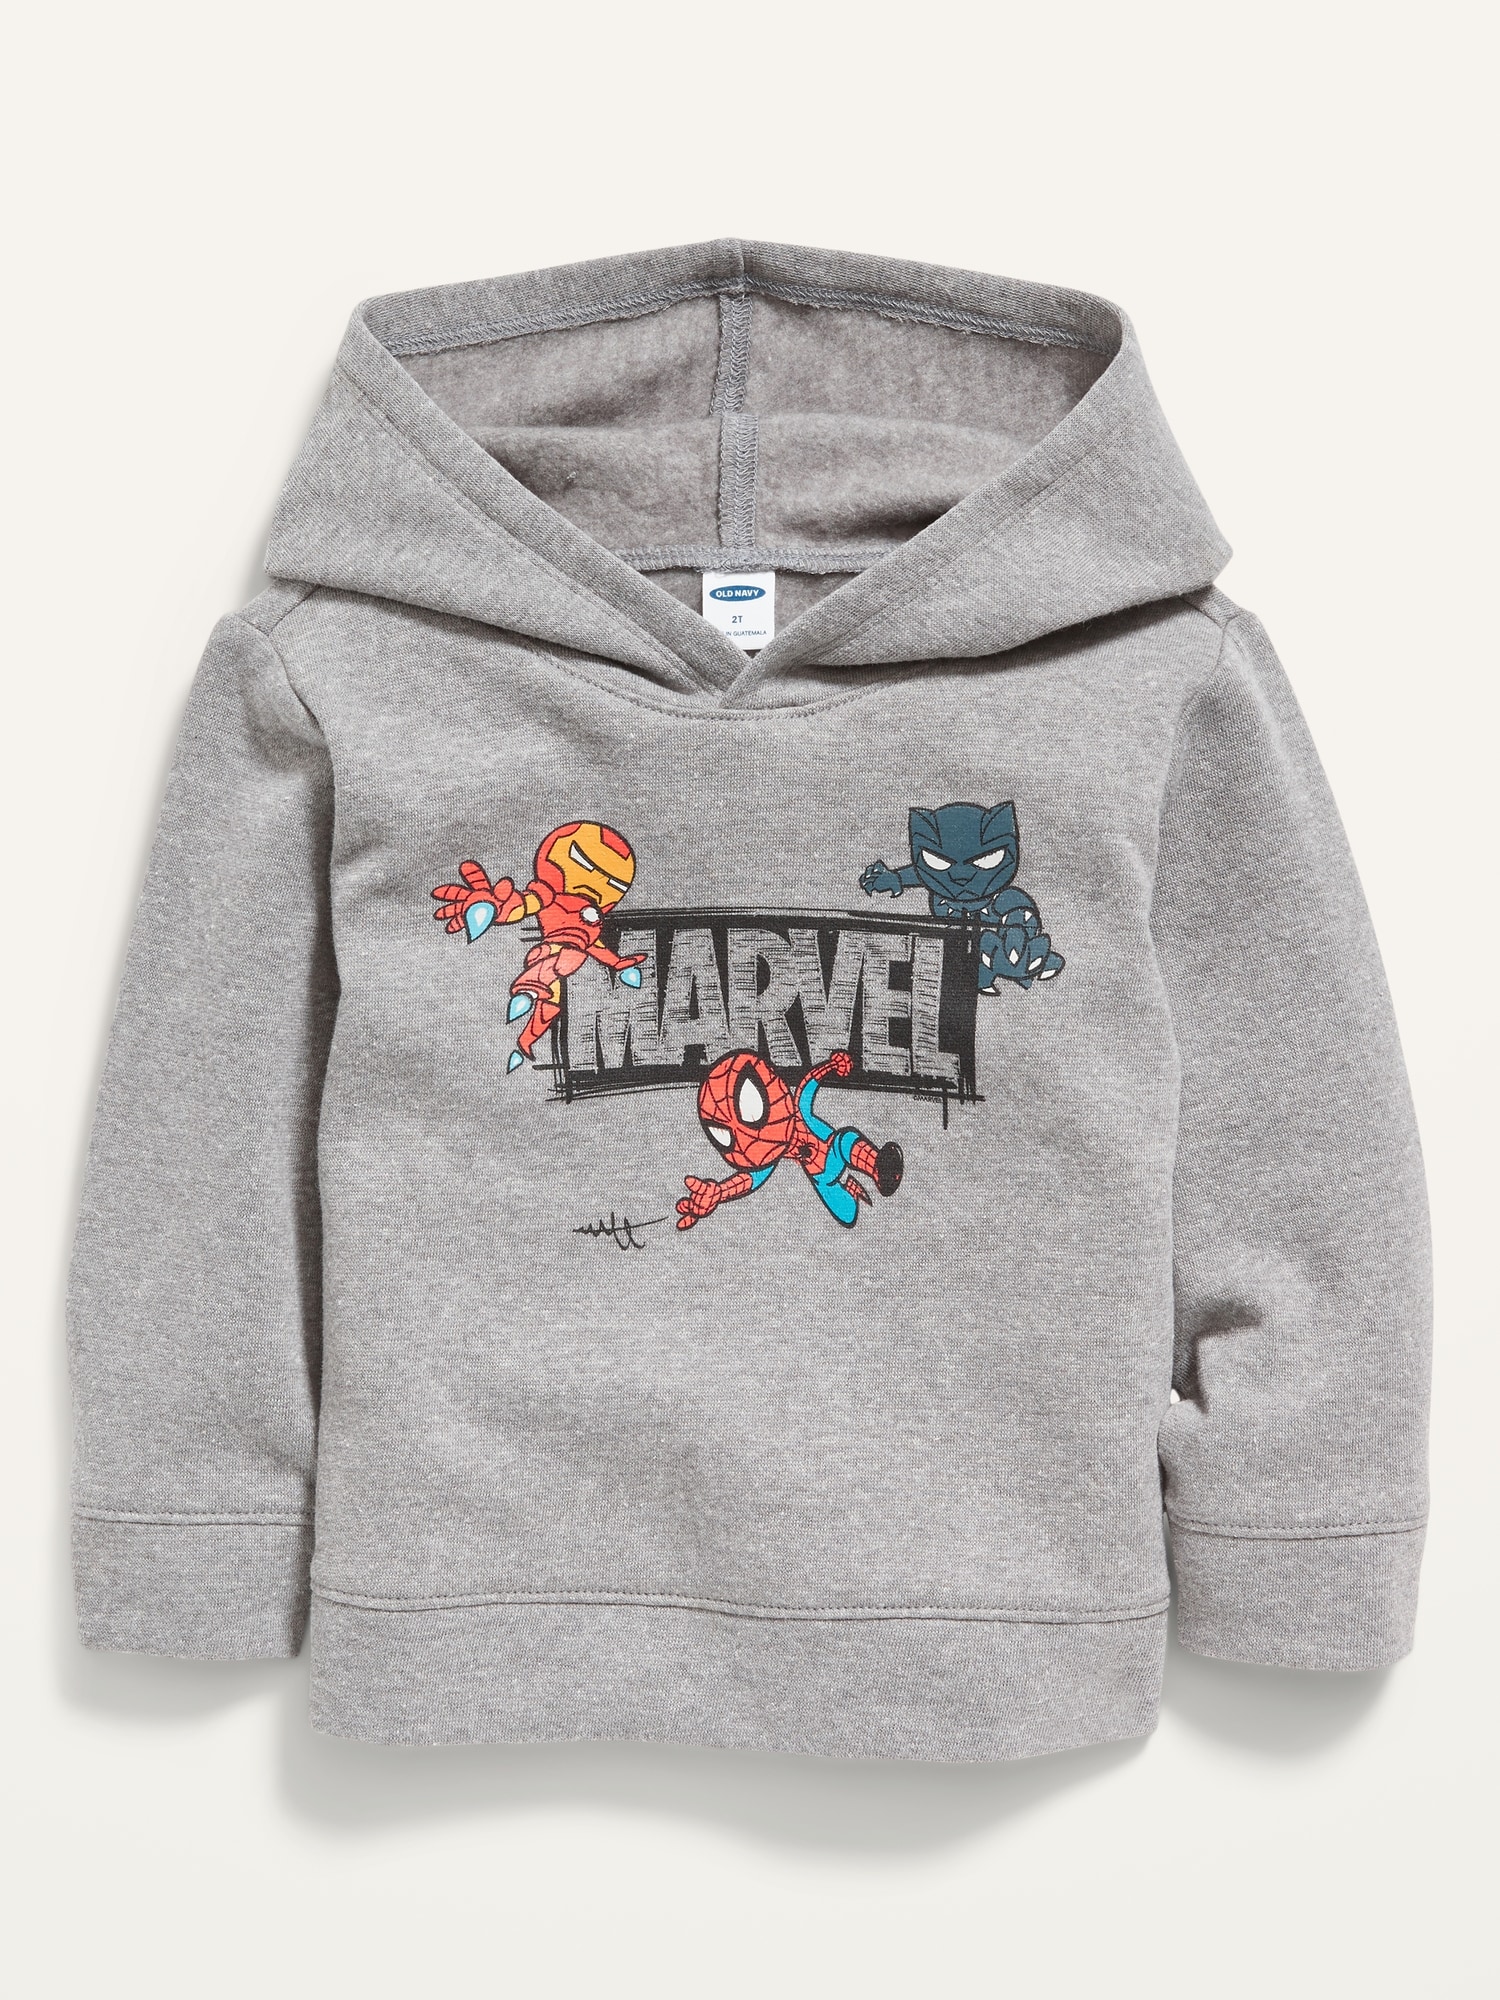 Unisex Licensed Pop-Culture Pullover Hoodie for Toddler 